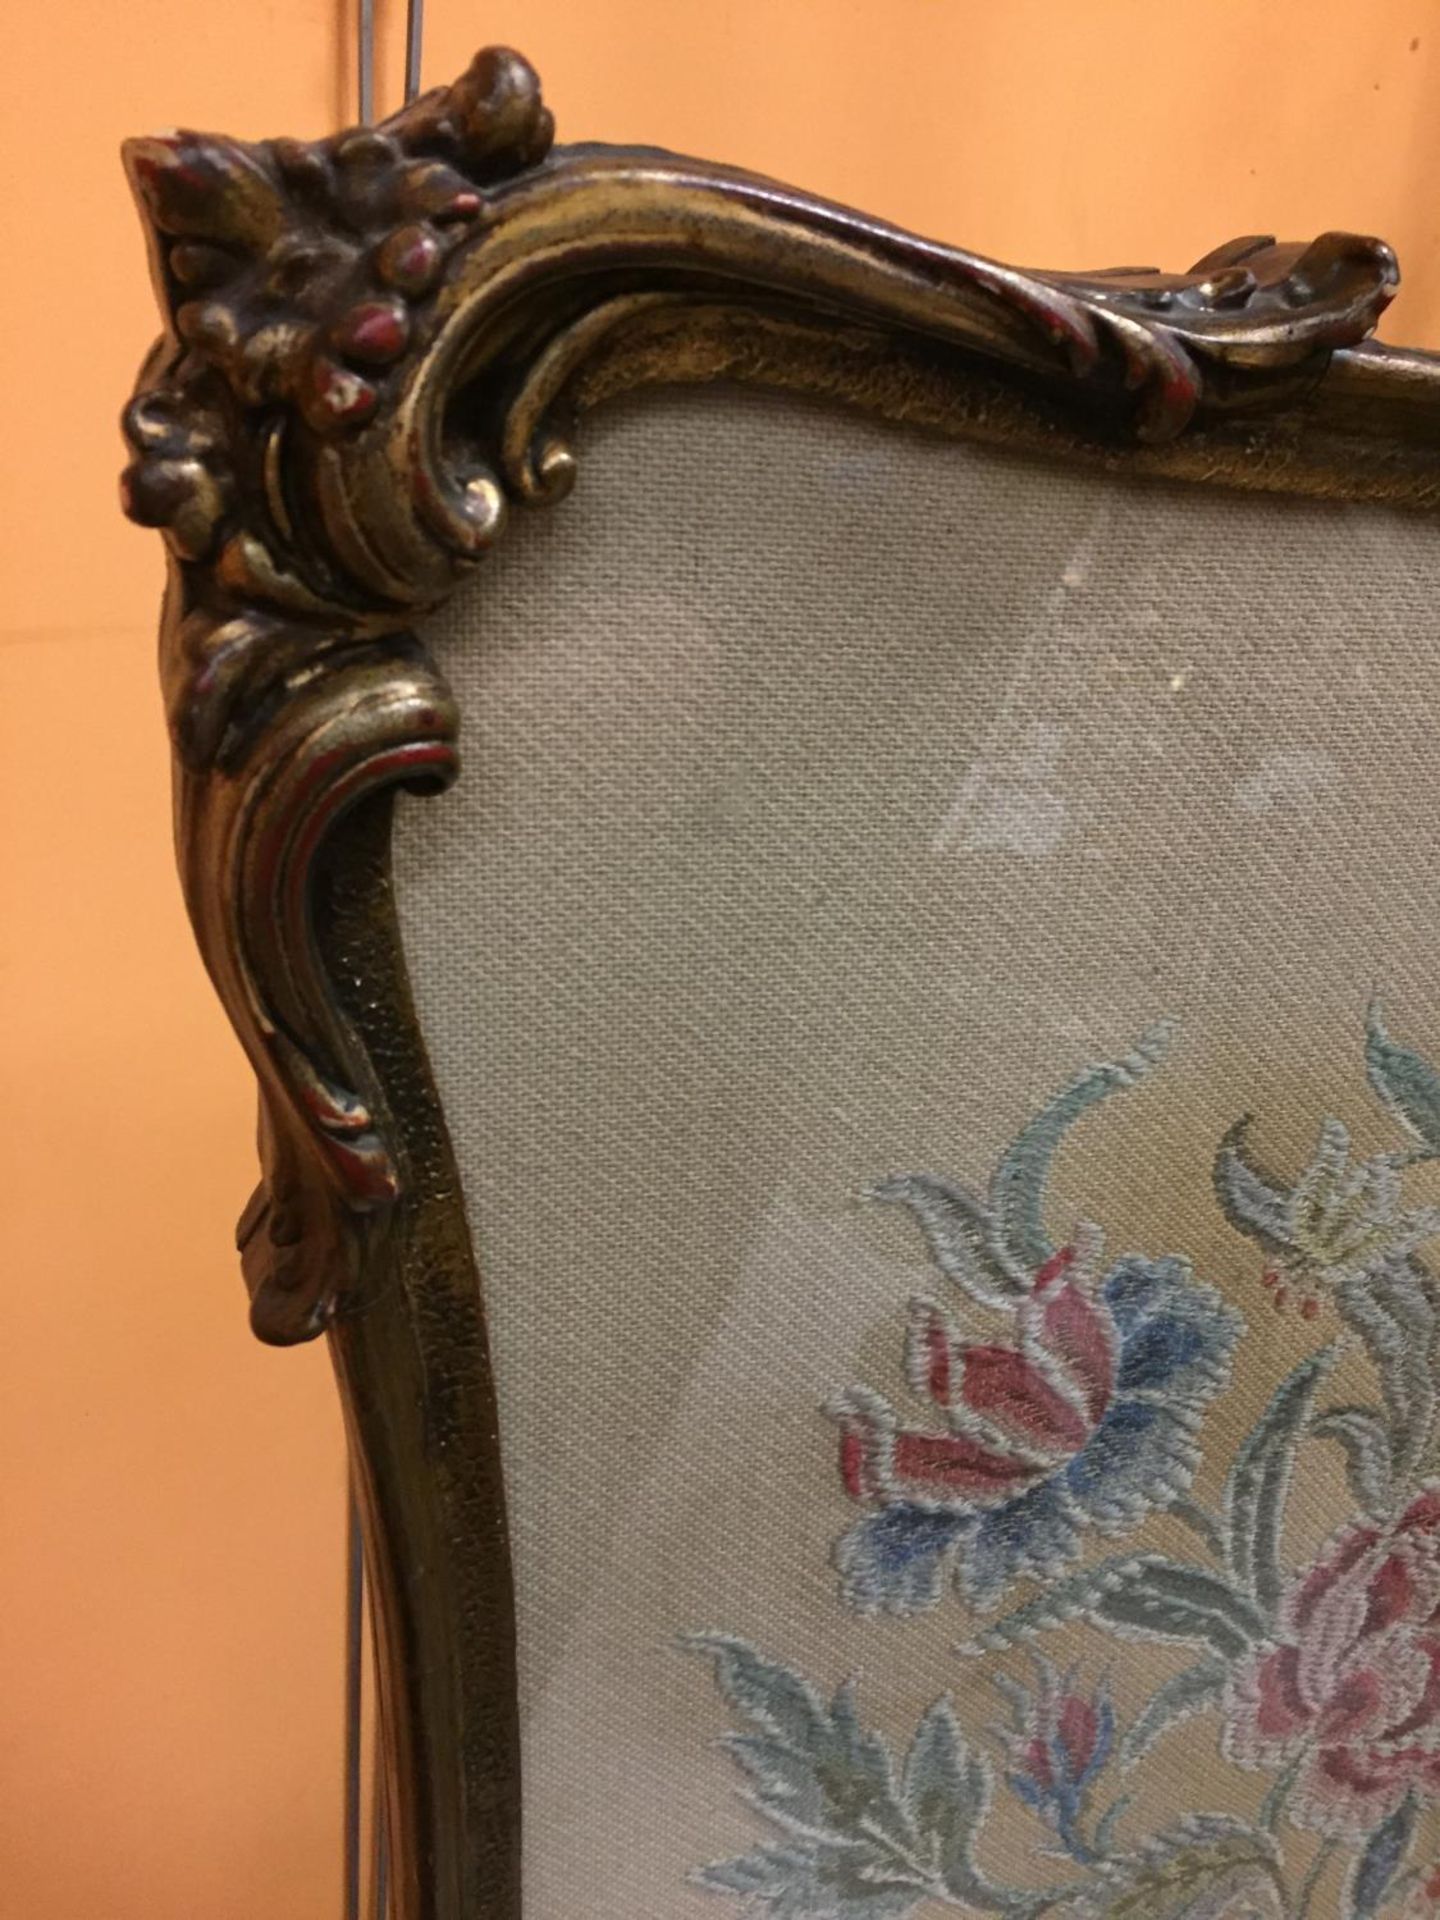 AN ORNATELY FRAMED CROSS STITCHED FIRE SCREEN WITH A FLOWER DESIGN - Image 4 of 4